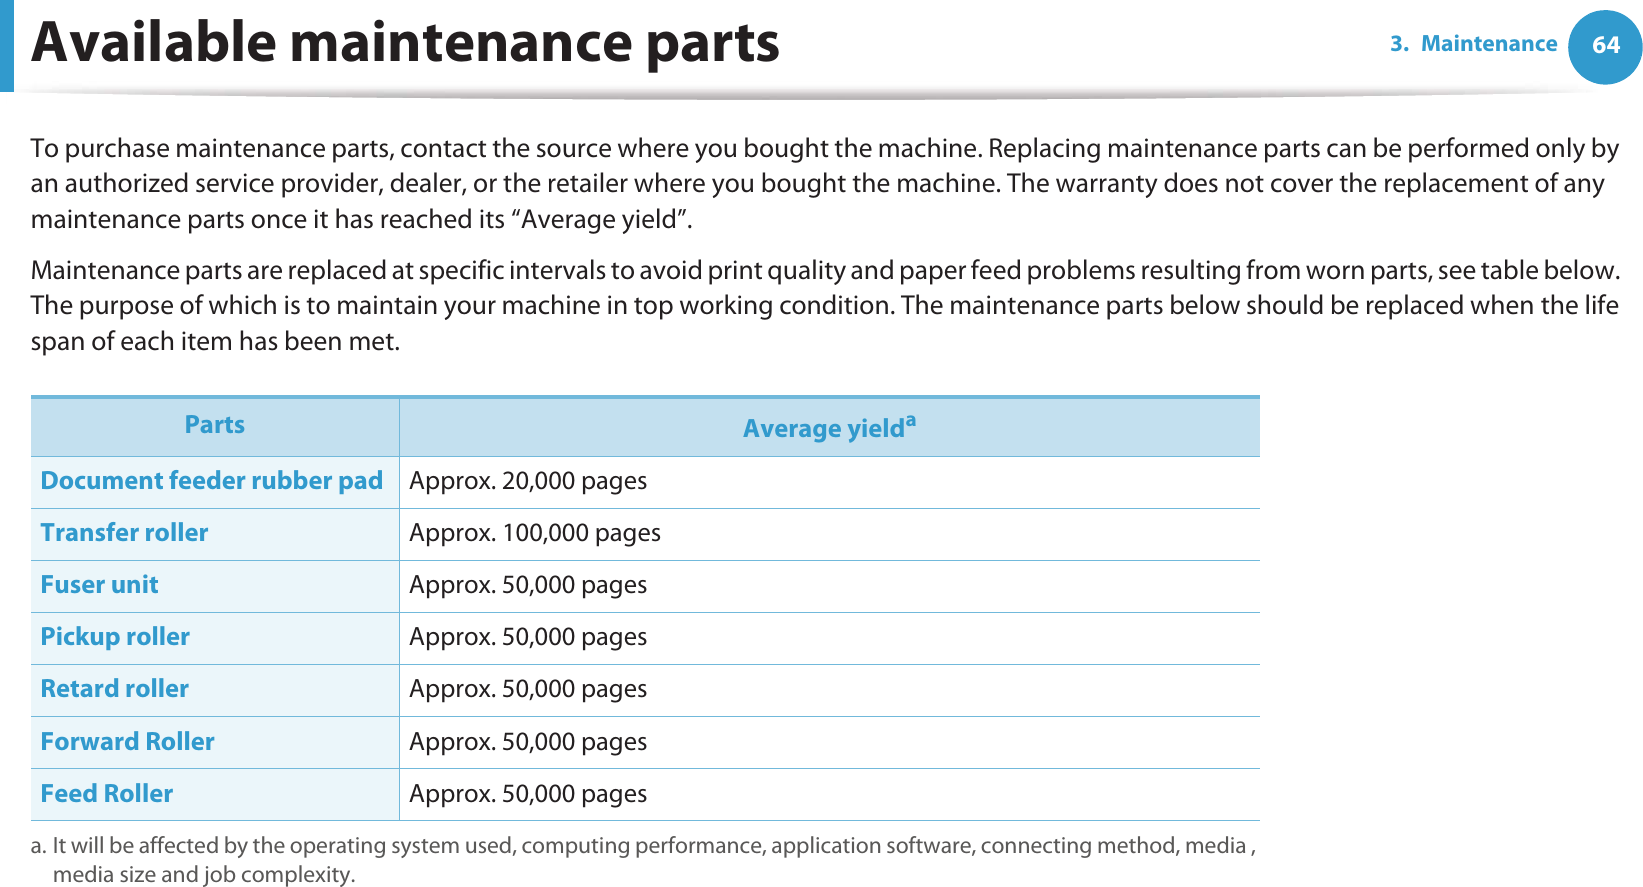 643. MaintenanceAvailable maintenance partsTo purchase maintenance parts, contact the source where you bought the machine. Replacing maintenance parts can be performed only by an authorized service provider, dealer, or the retailer where you bought the machine. The warranty does not cover the replacement of any maintenance parts once it has reached its “Average yield”.Maintenance parts are replaced at specific intervals to avoid print quality and paper feed problems resulting from worn parts, see table below. The purpose of which is to maintain your machine in top working condition. The maintenance parts below should be replaced when the life span of each item has been met.Parts Average yieldaa. It will be affected by the operating system used, computing performance, application software, connecting method, media , media size and job complexity.Document feeder rubber pad Approx. 20,000 pagesTransfer roller Approx. 100,000 pages Fuser unit Approx. 50,000 pagesPickup roller Approx. 50,000 pagesRetard roller Approx. 50,000 pagesForward Roller Approx. 50,000 pagesFeed Roller Approx. 50,000 pages